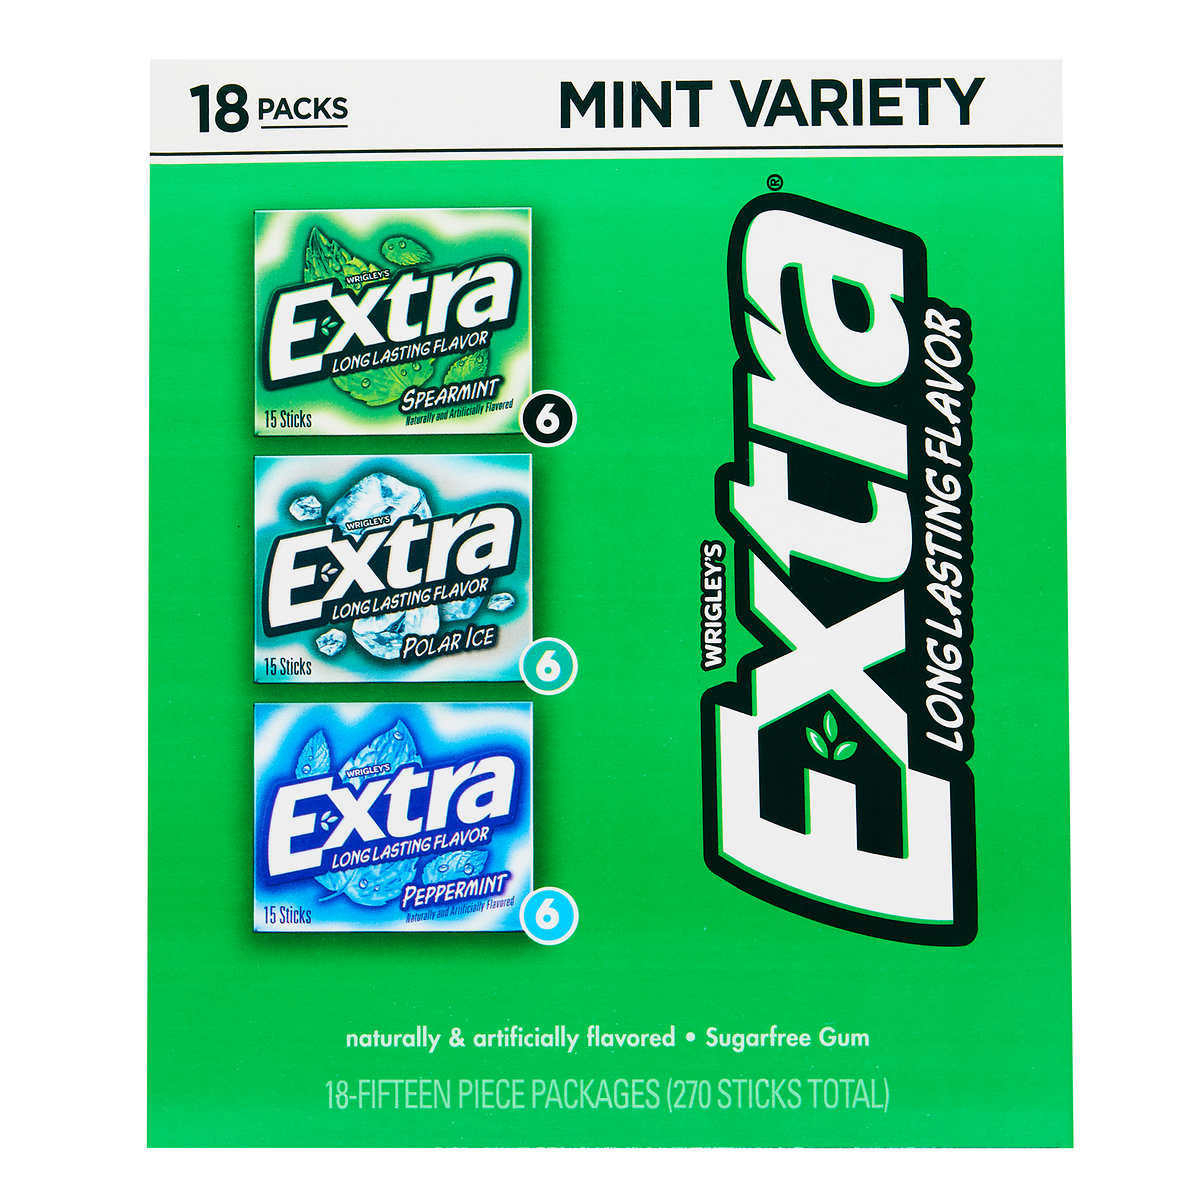 Extra Sugar Free Chewing Gum, Mint Variety Pack, 15 Sticks (18 Count)